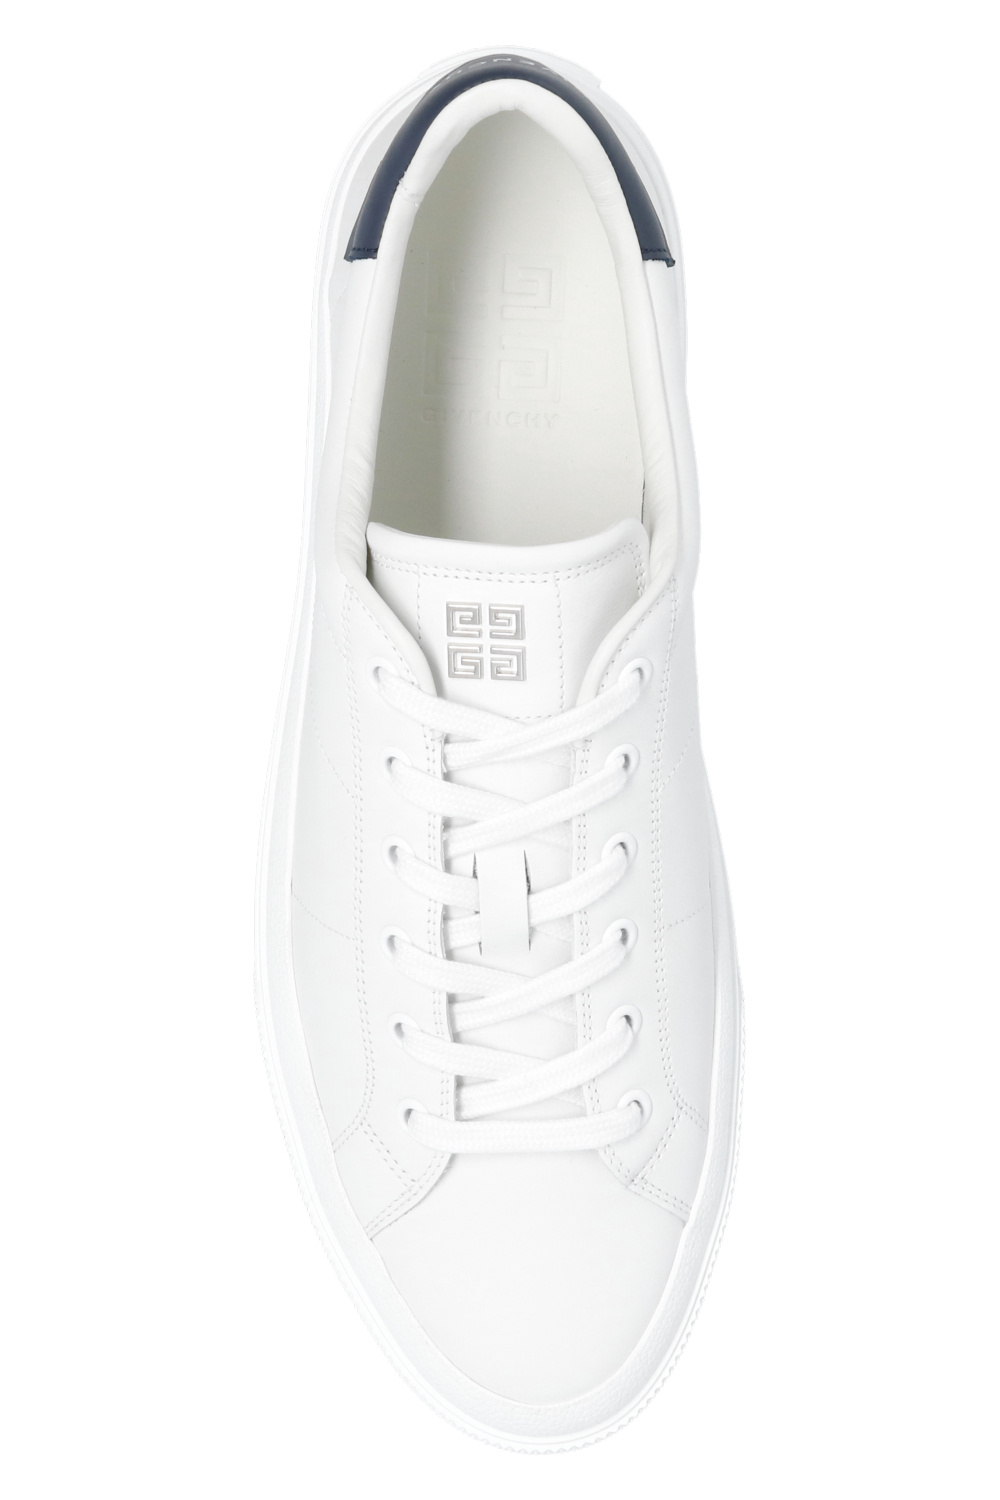 givenchy backpack ‘City Light’ sneakers